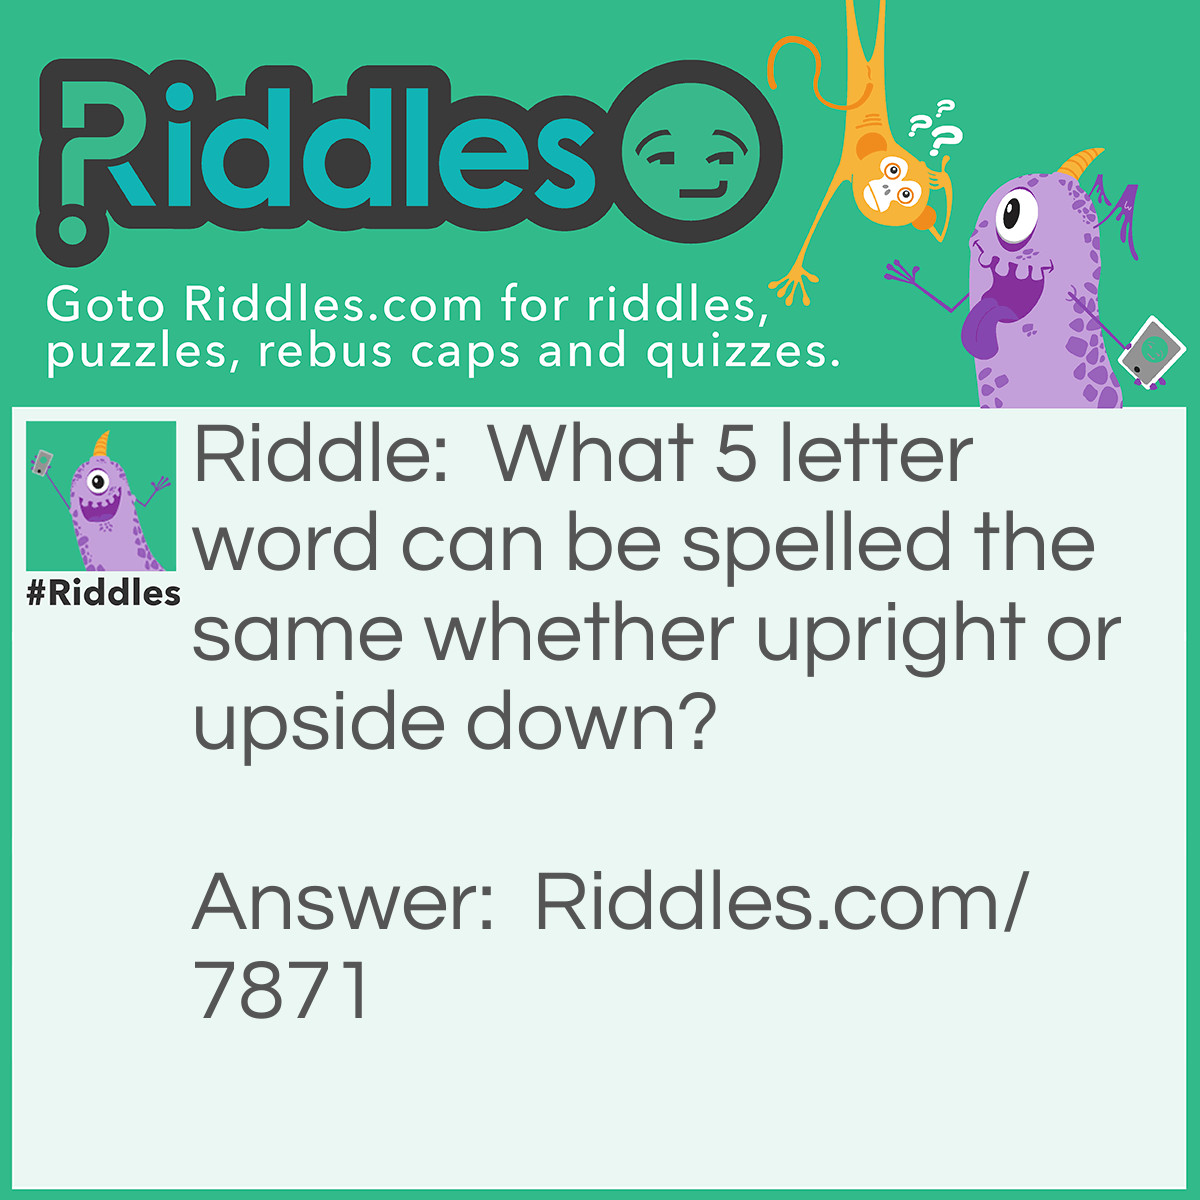 Riddle: What 5 letter word can be spelled the same whether upright or upside down? Answer: SWIMS